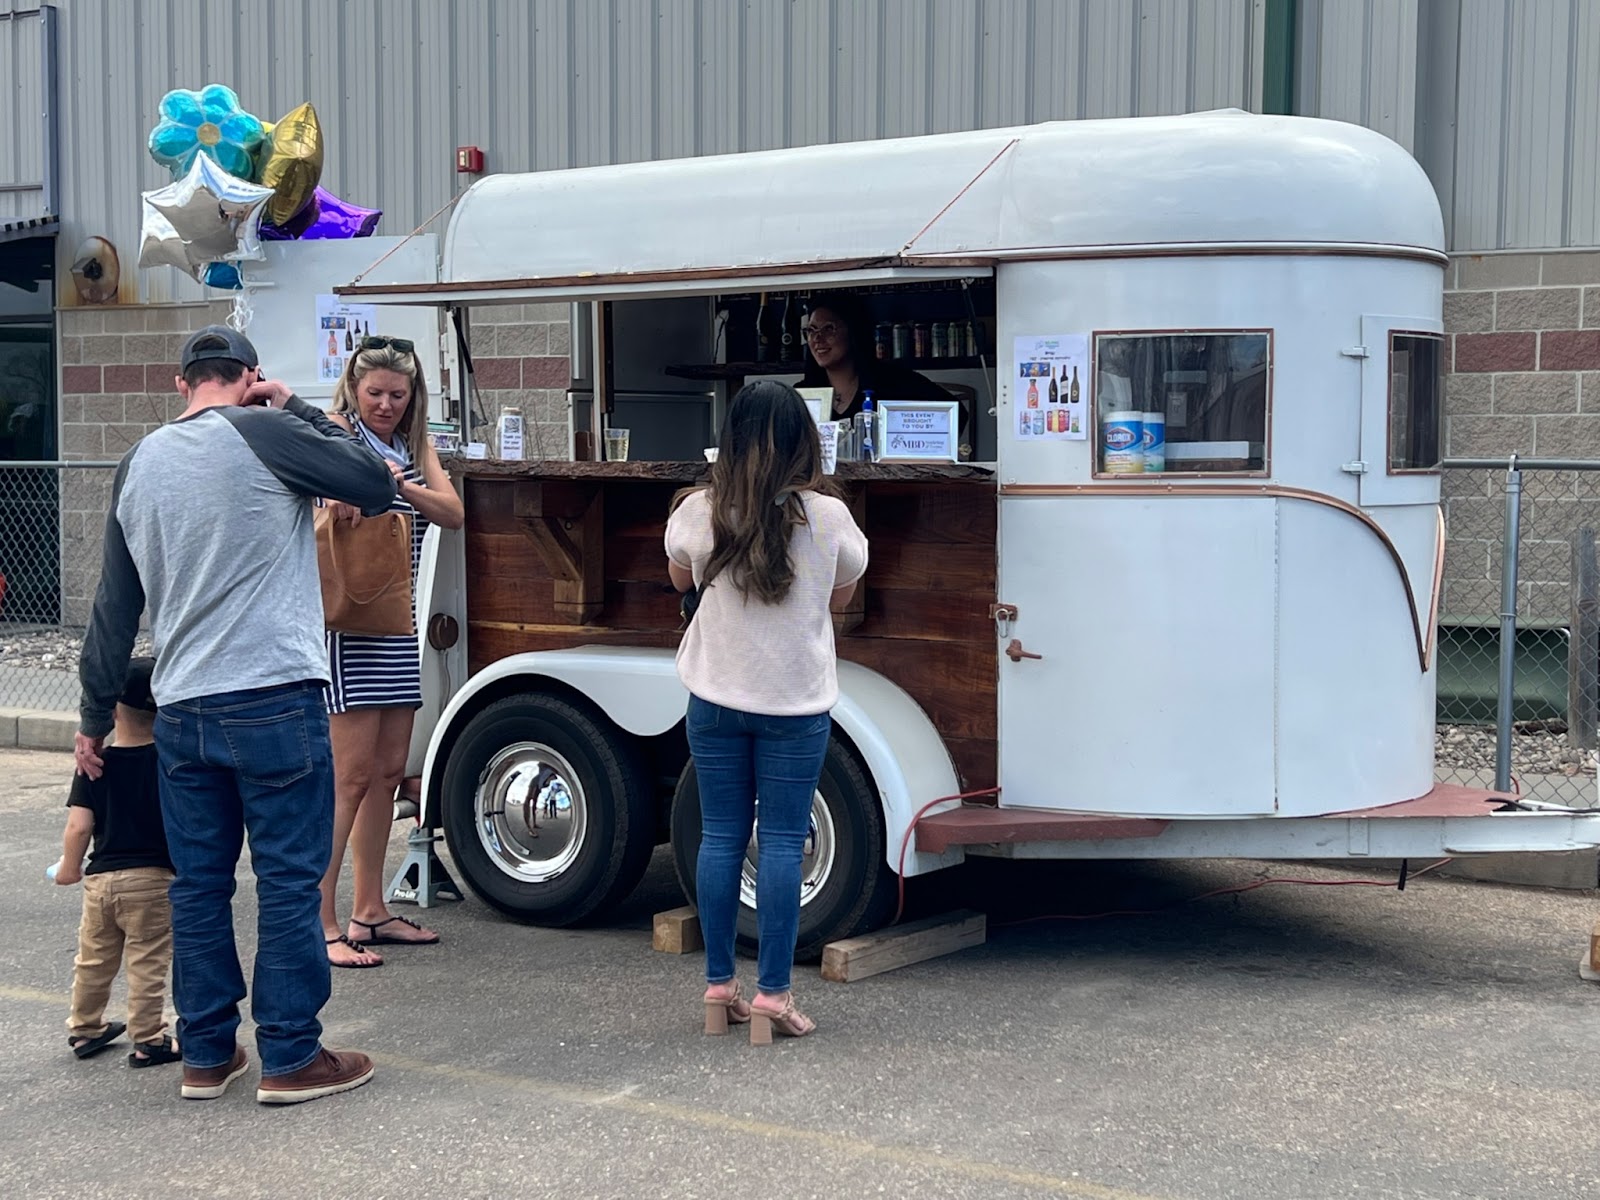 Adults and children line up at the On the Rocks mobile bar for drinks and treats at The Family Center/La Familia’s annual BELONG spring fundraiser.